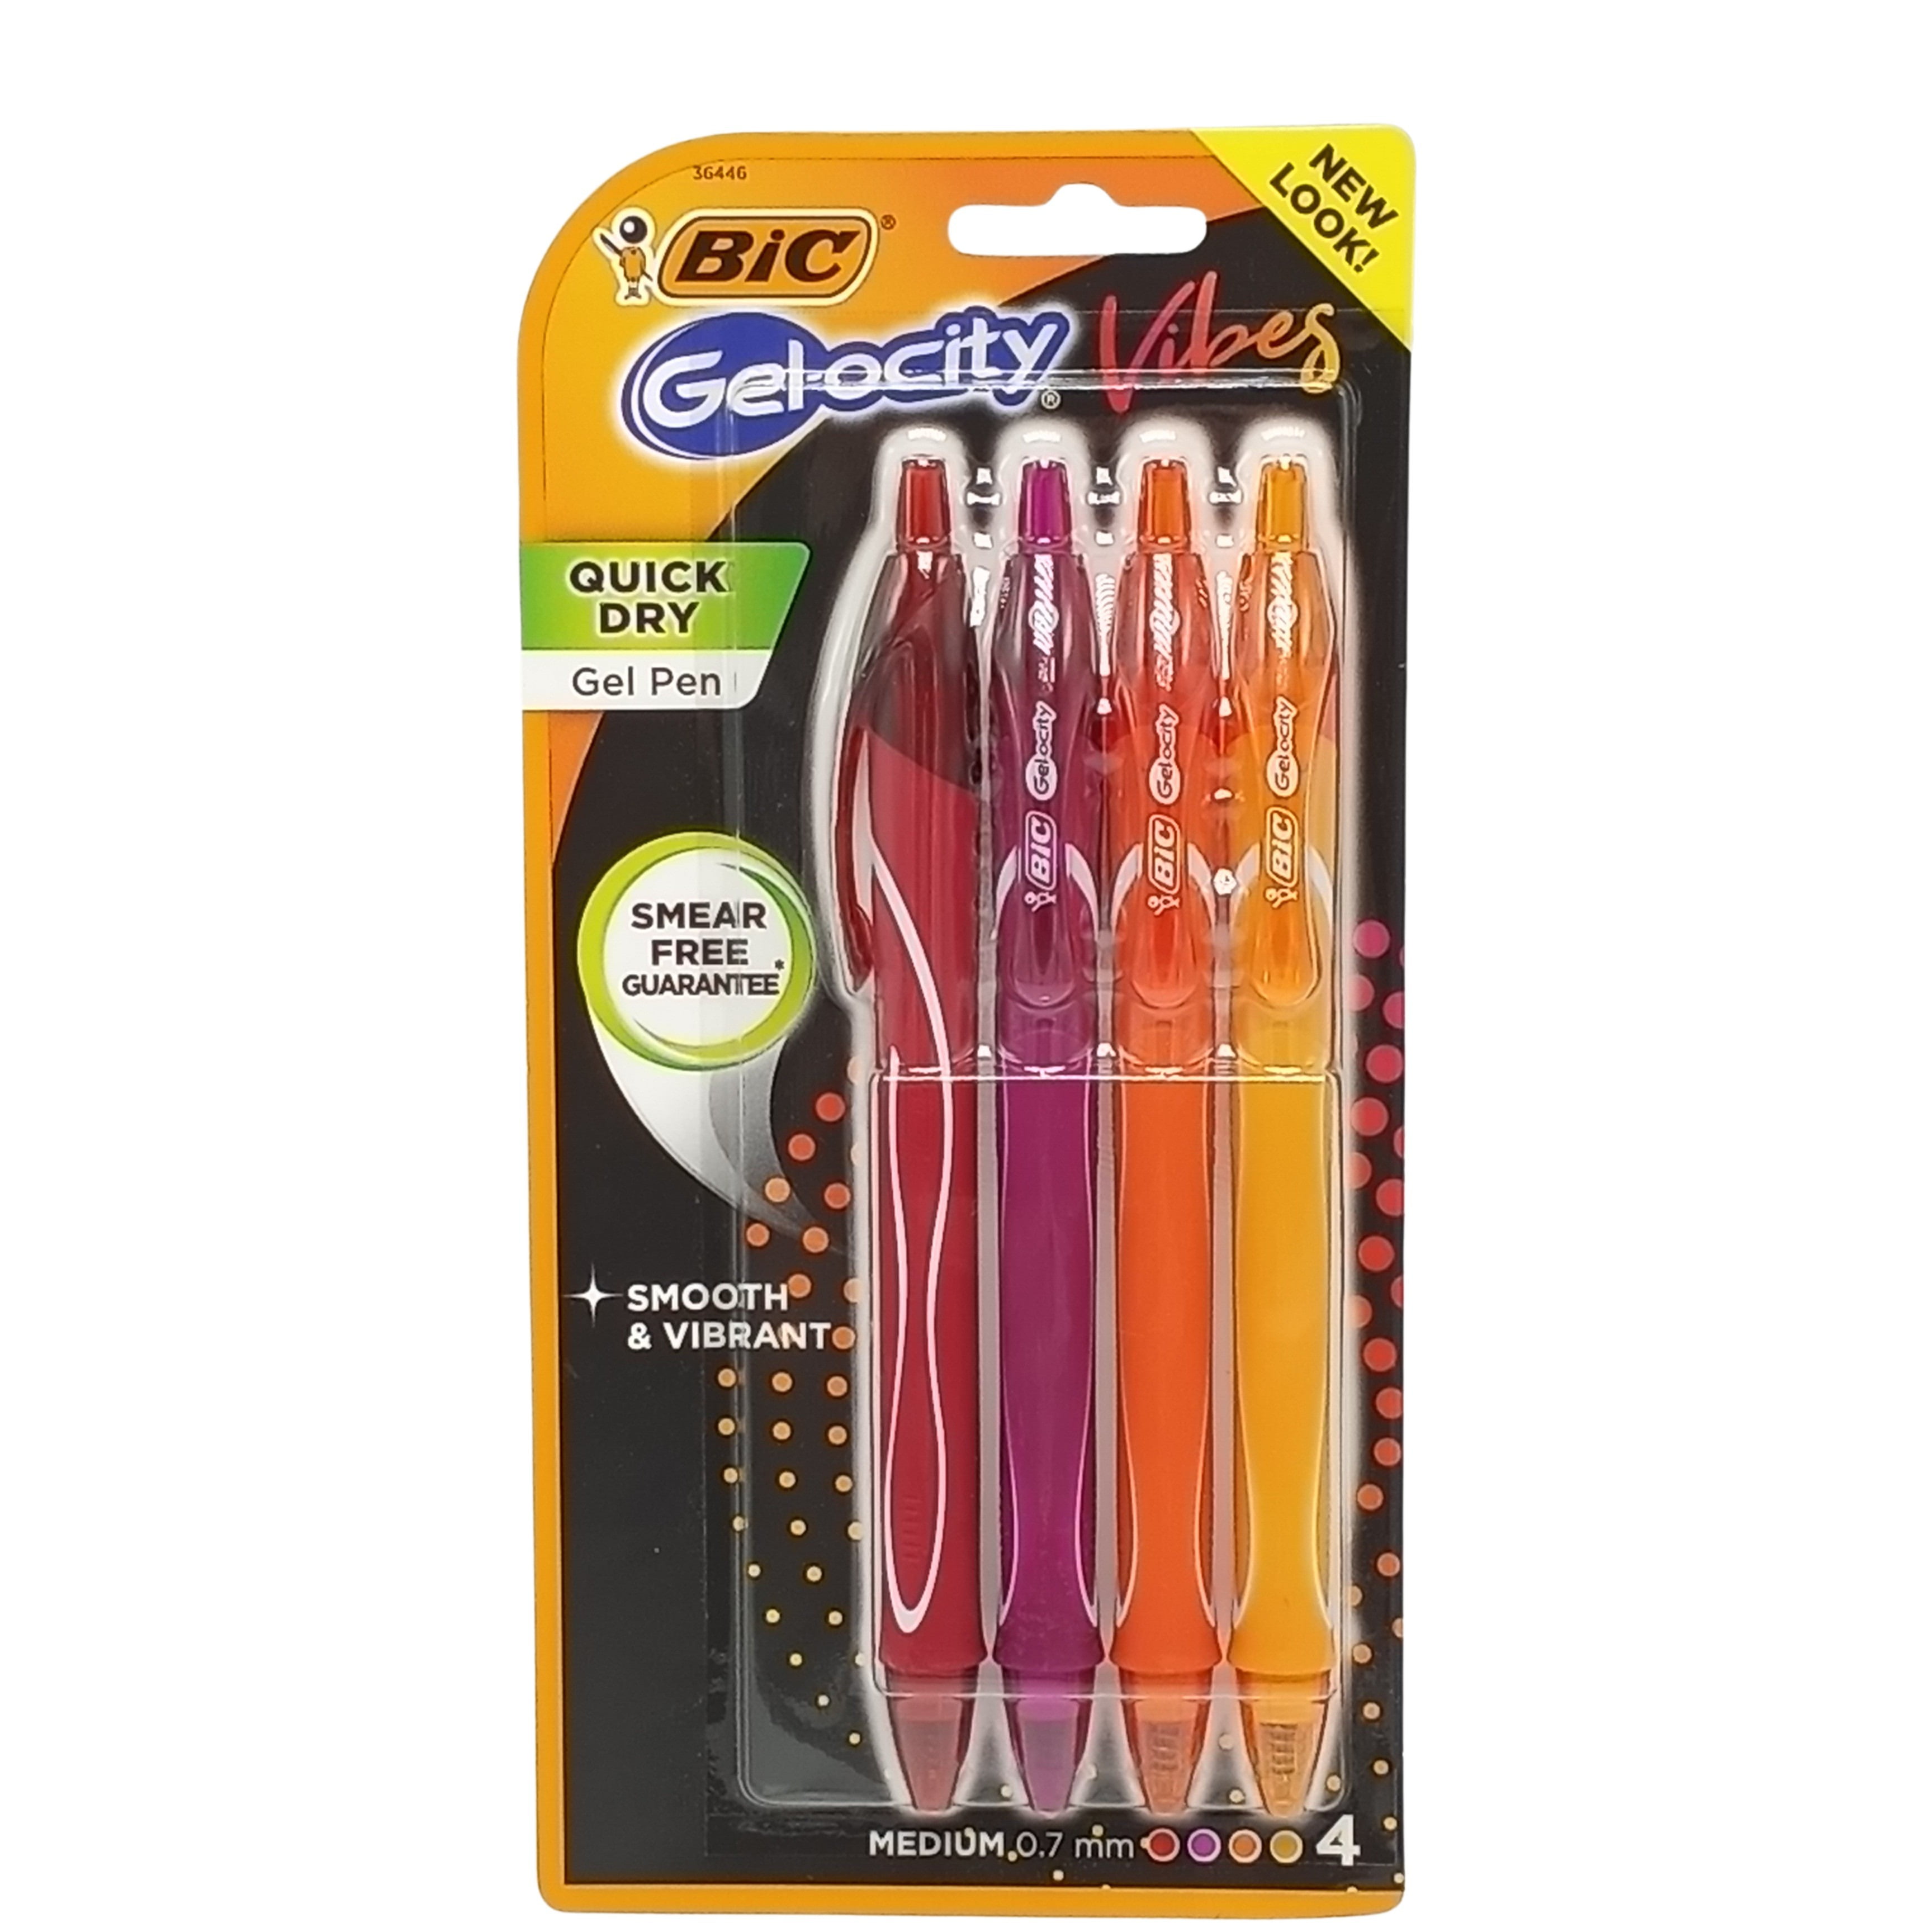 BIC Gelocity Vibes Quick Dry Retractable Gel Pen, Medium Point (0.7 mm),  Assorted Colors, 4 Count 